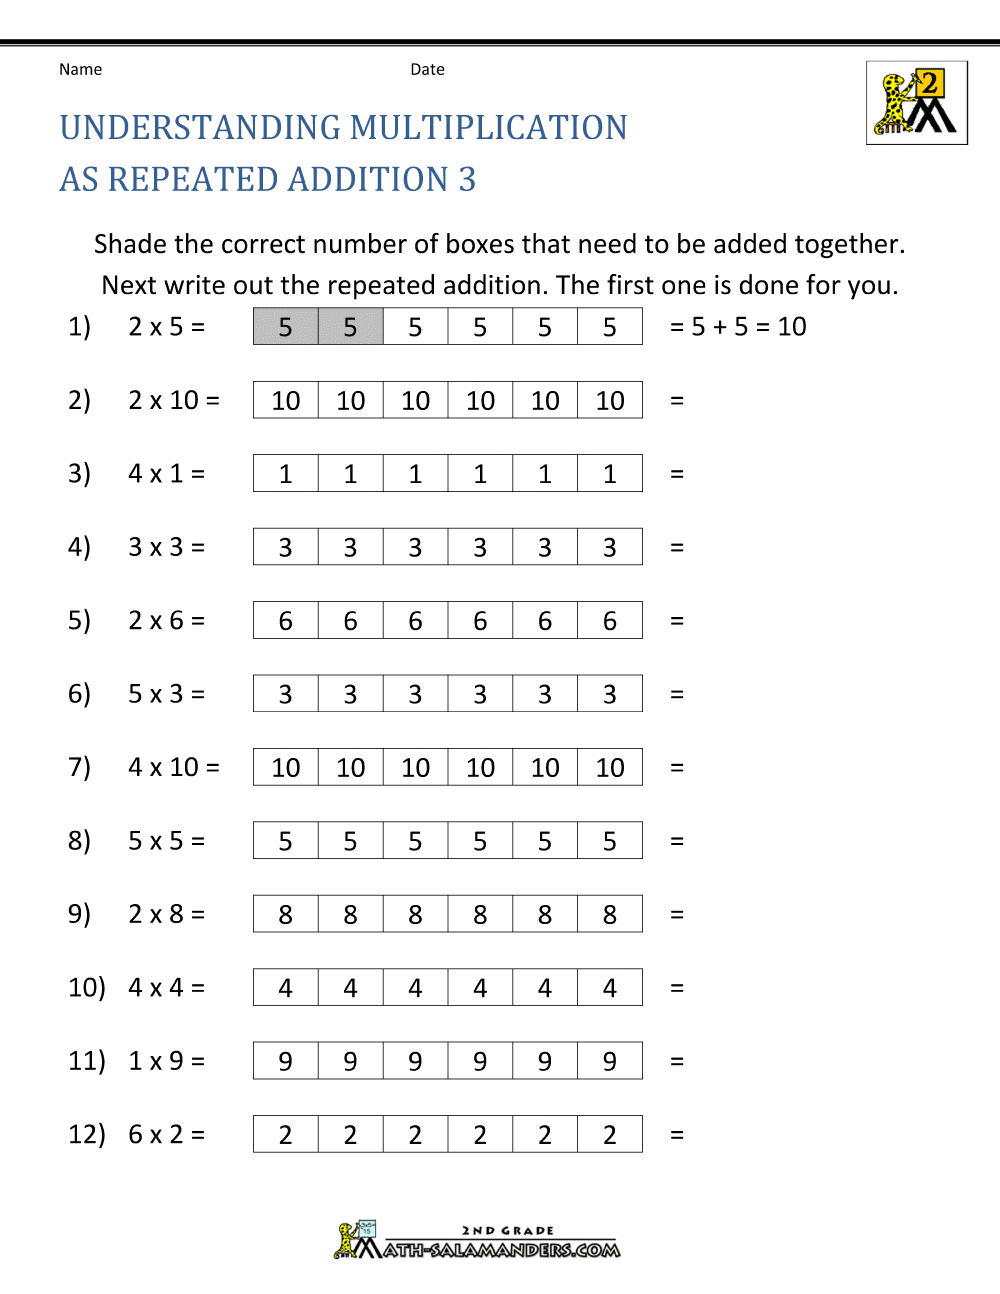 multiplication-sentence-repeated-addition-worksheet-repeated-addition